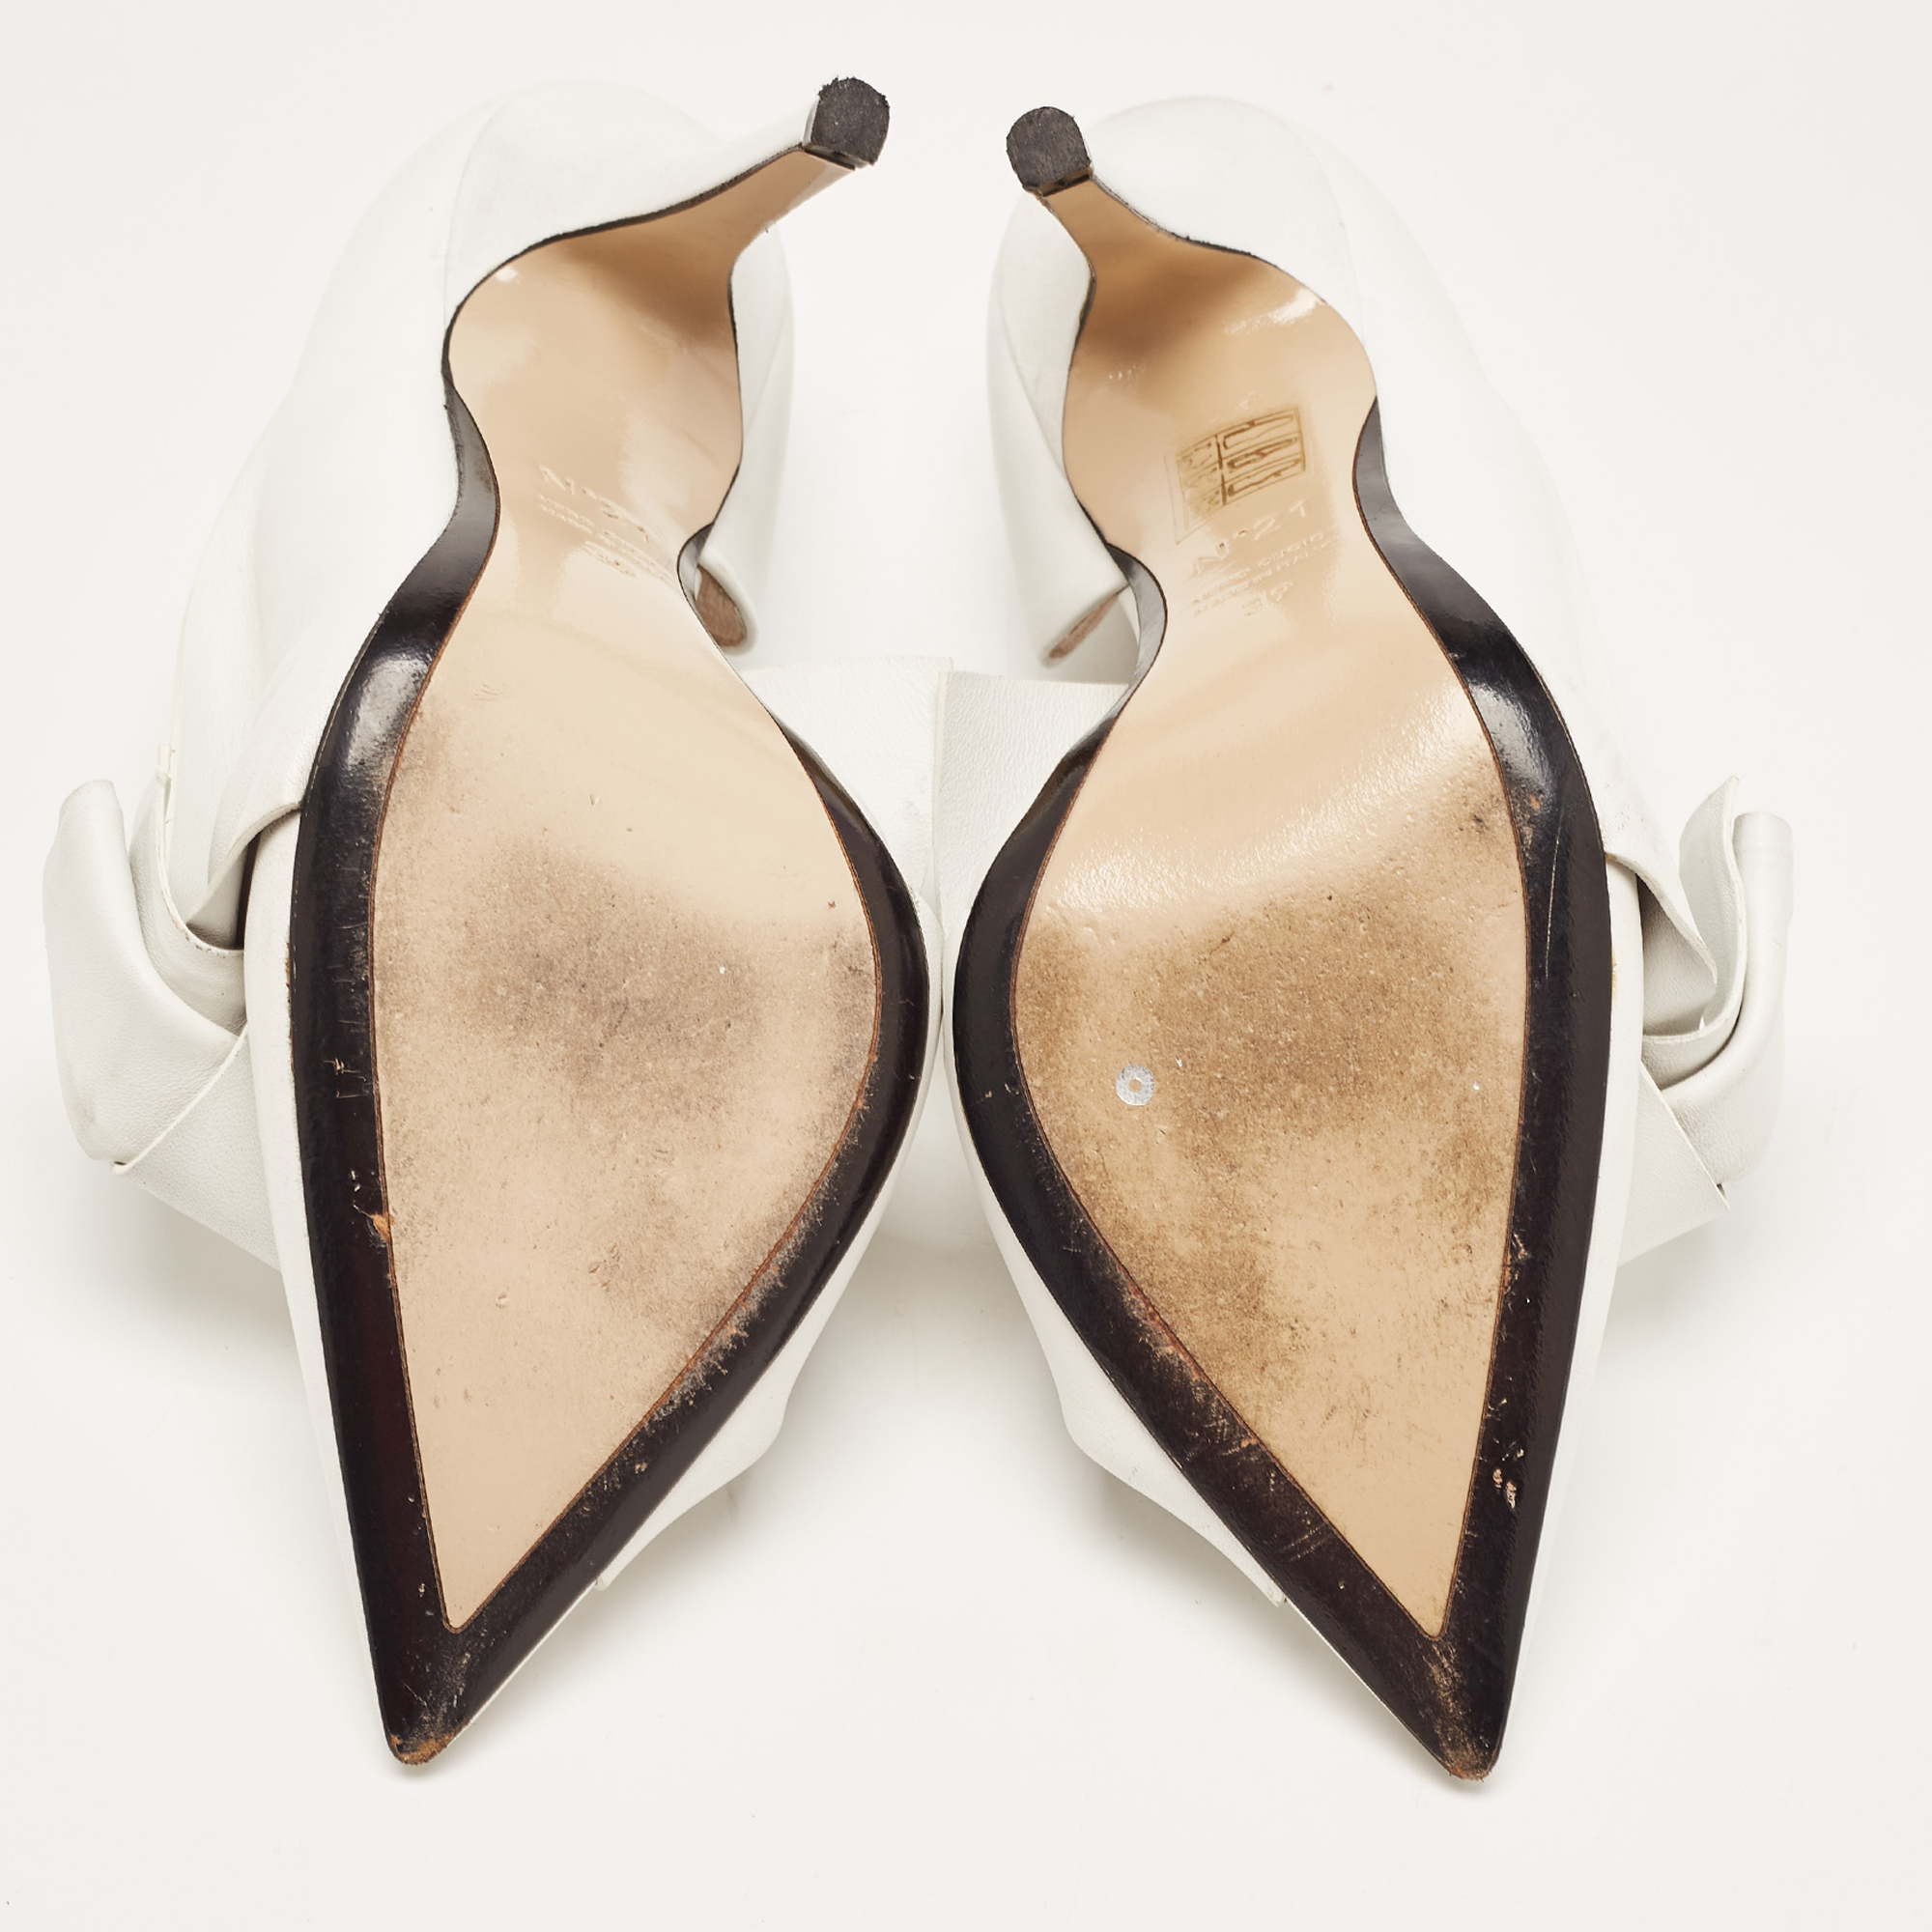 Nº21 White Leather Knot Pointed Toe Pumps Size 39